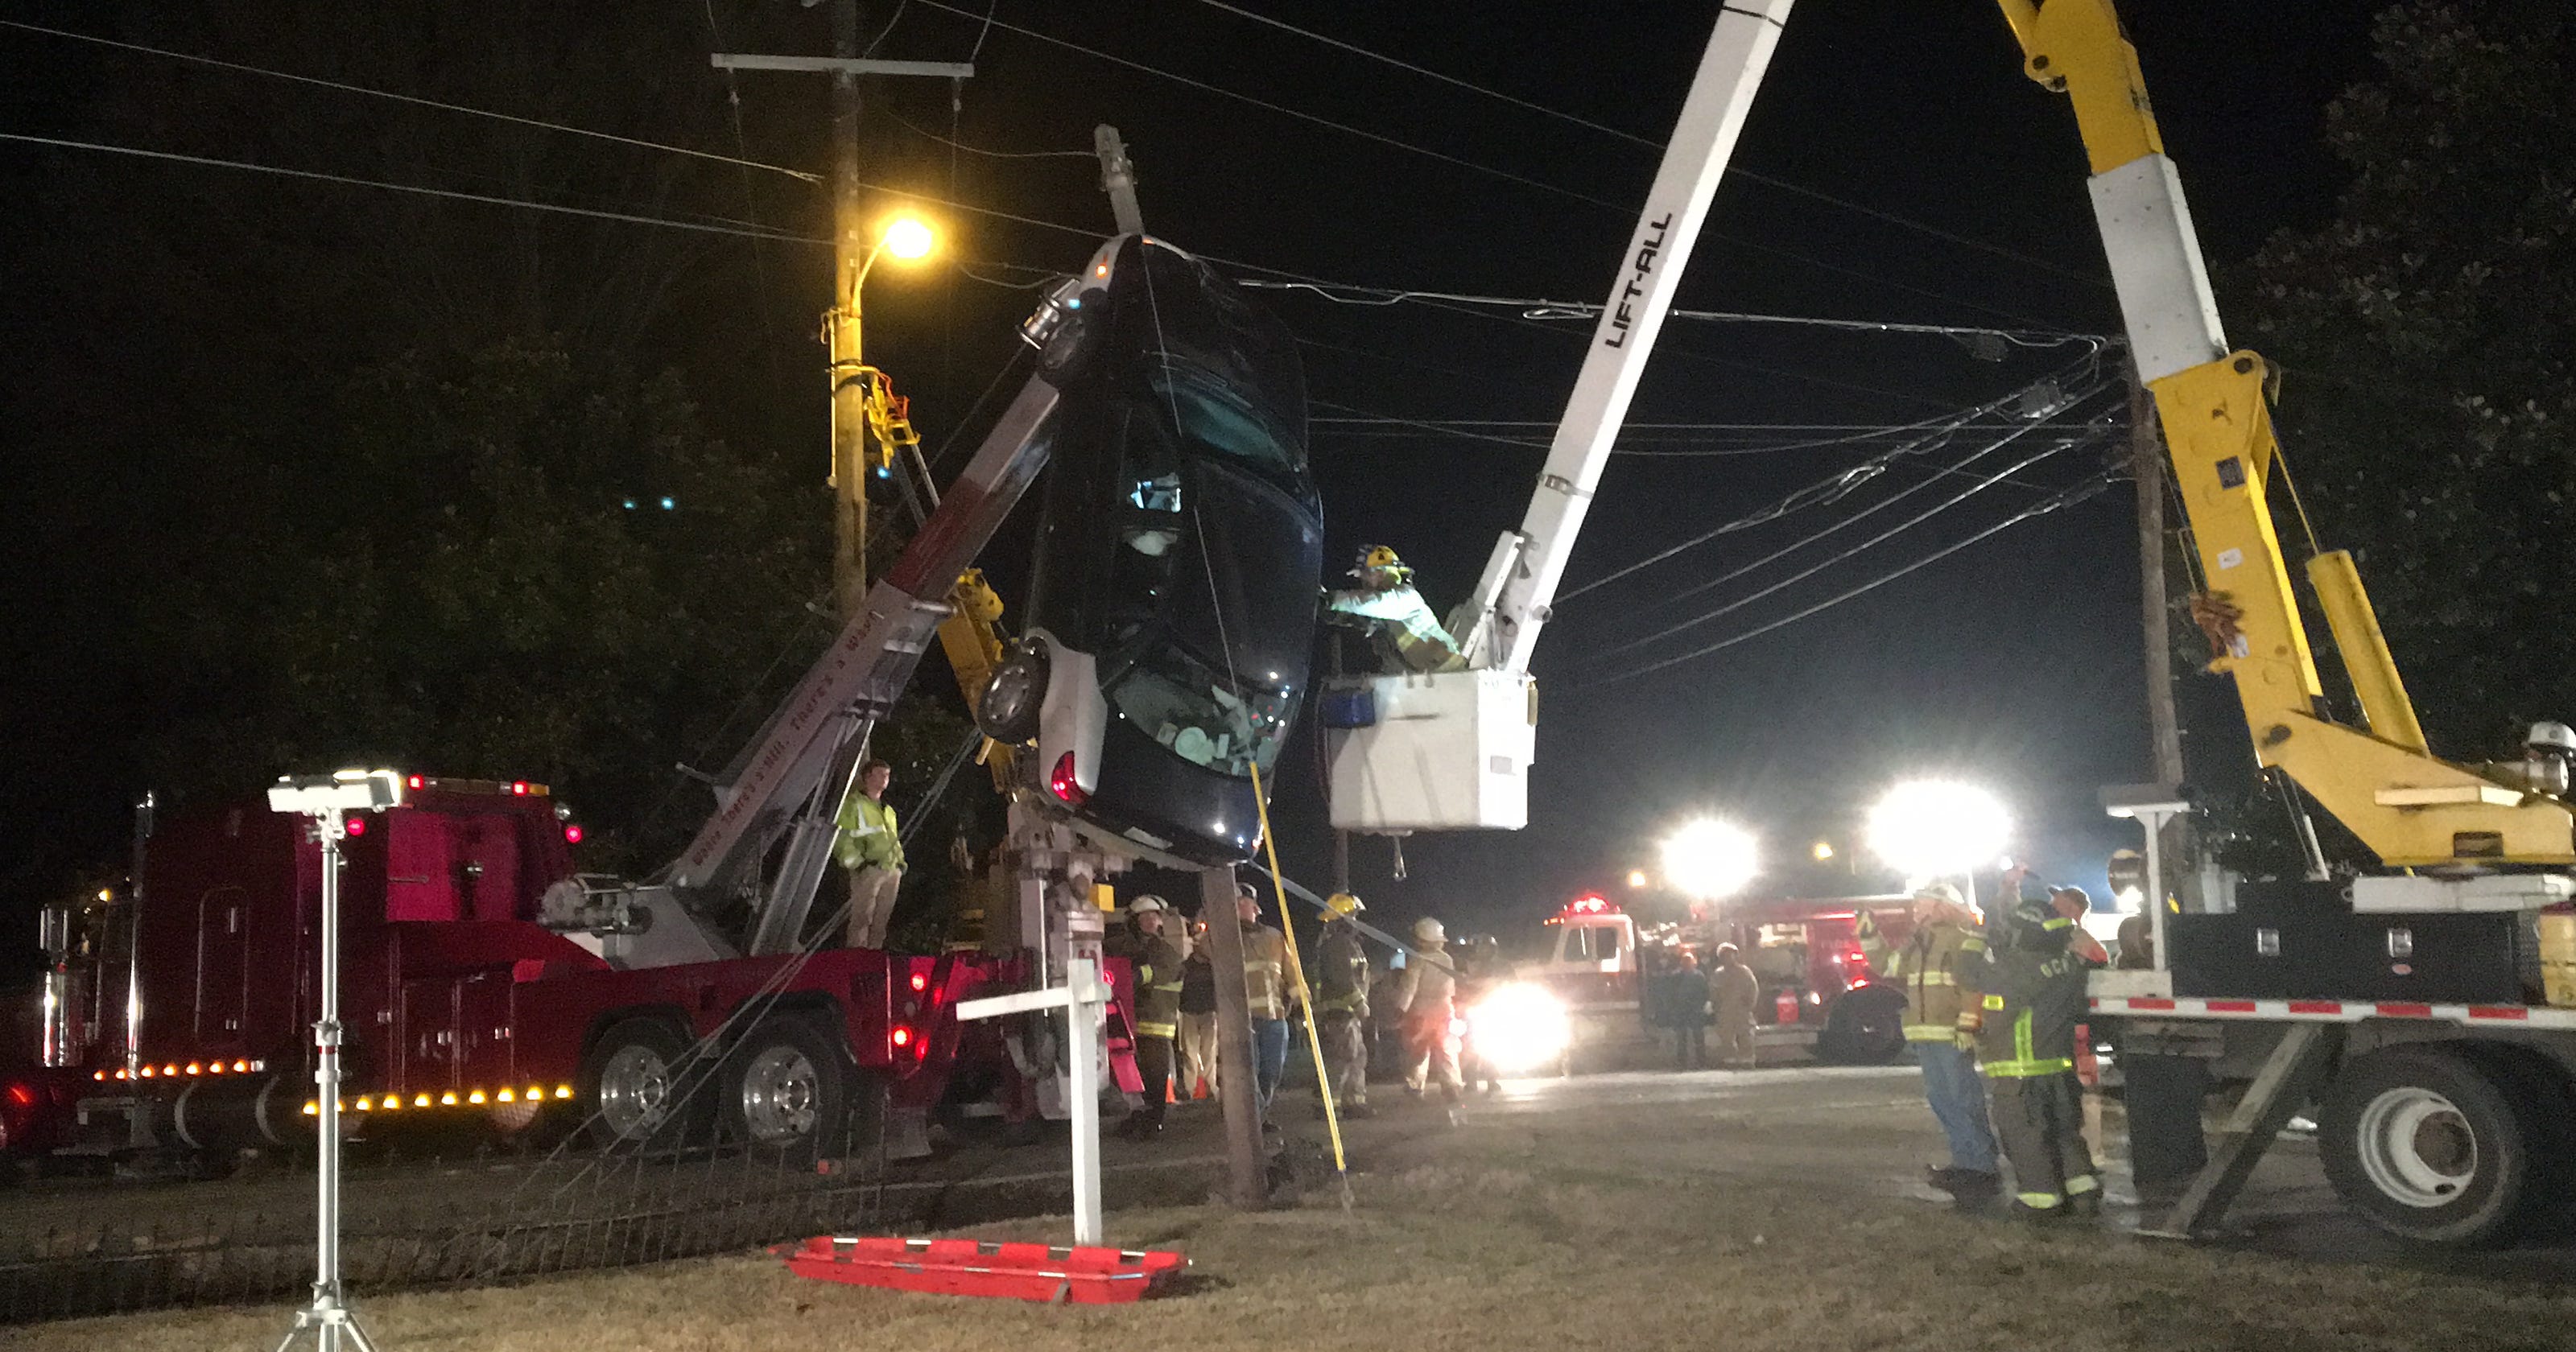 Woman rescued after car gets stuck in power lines